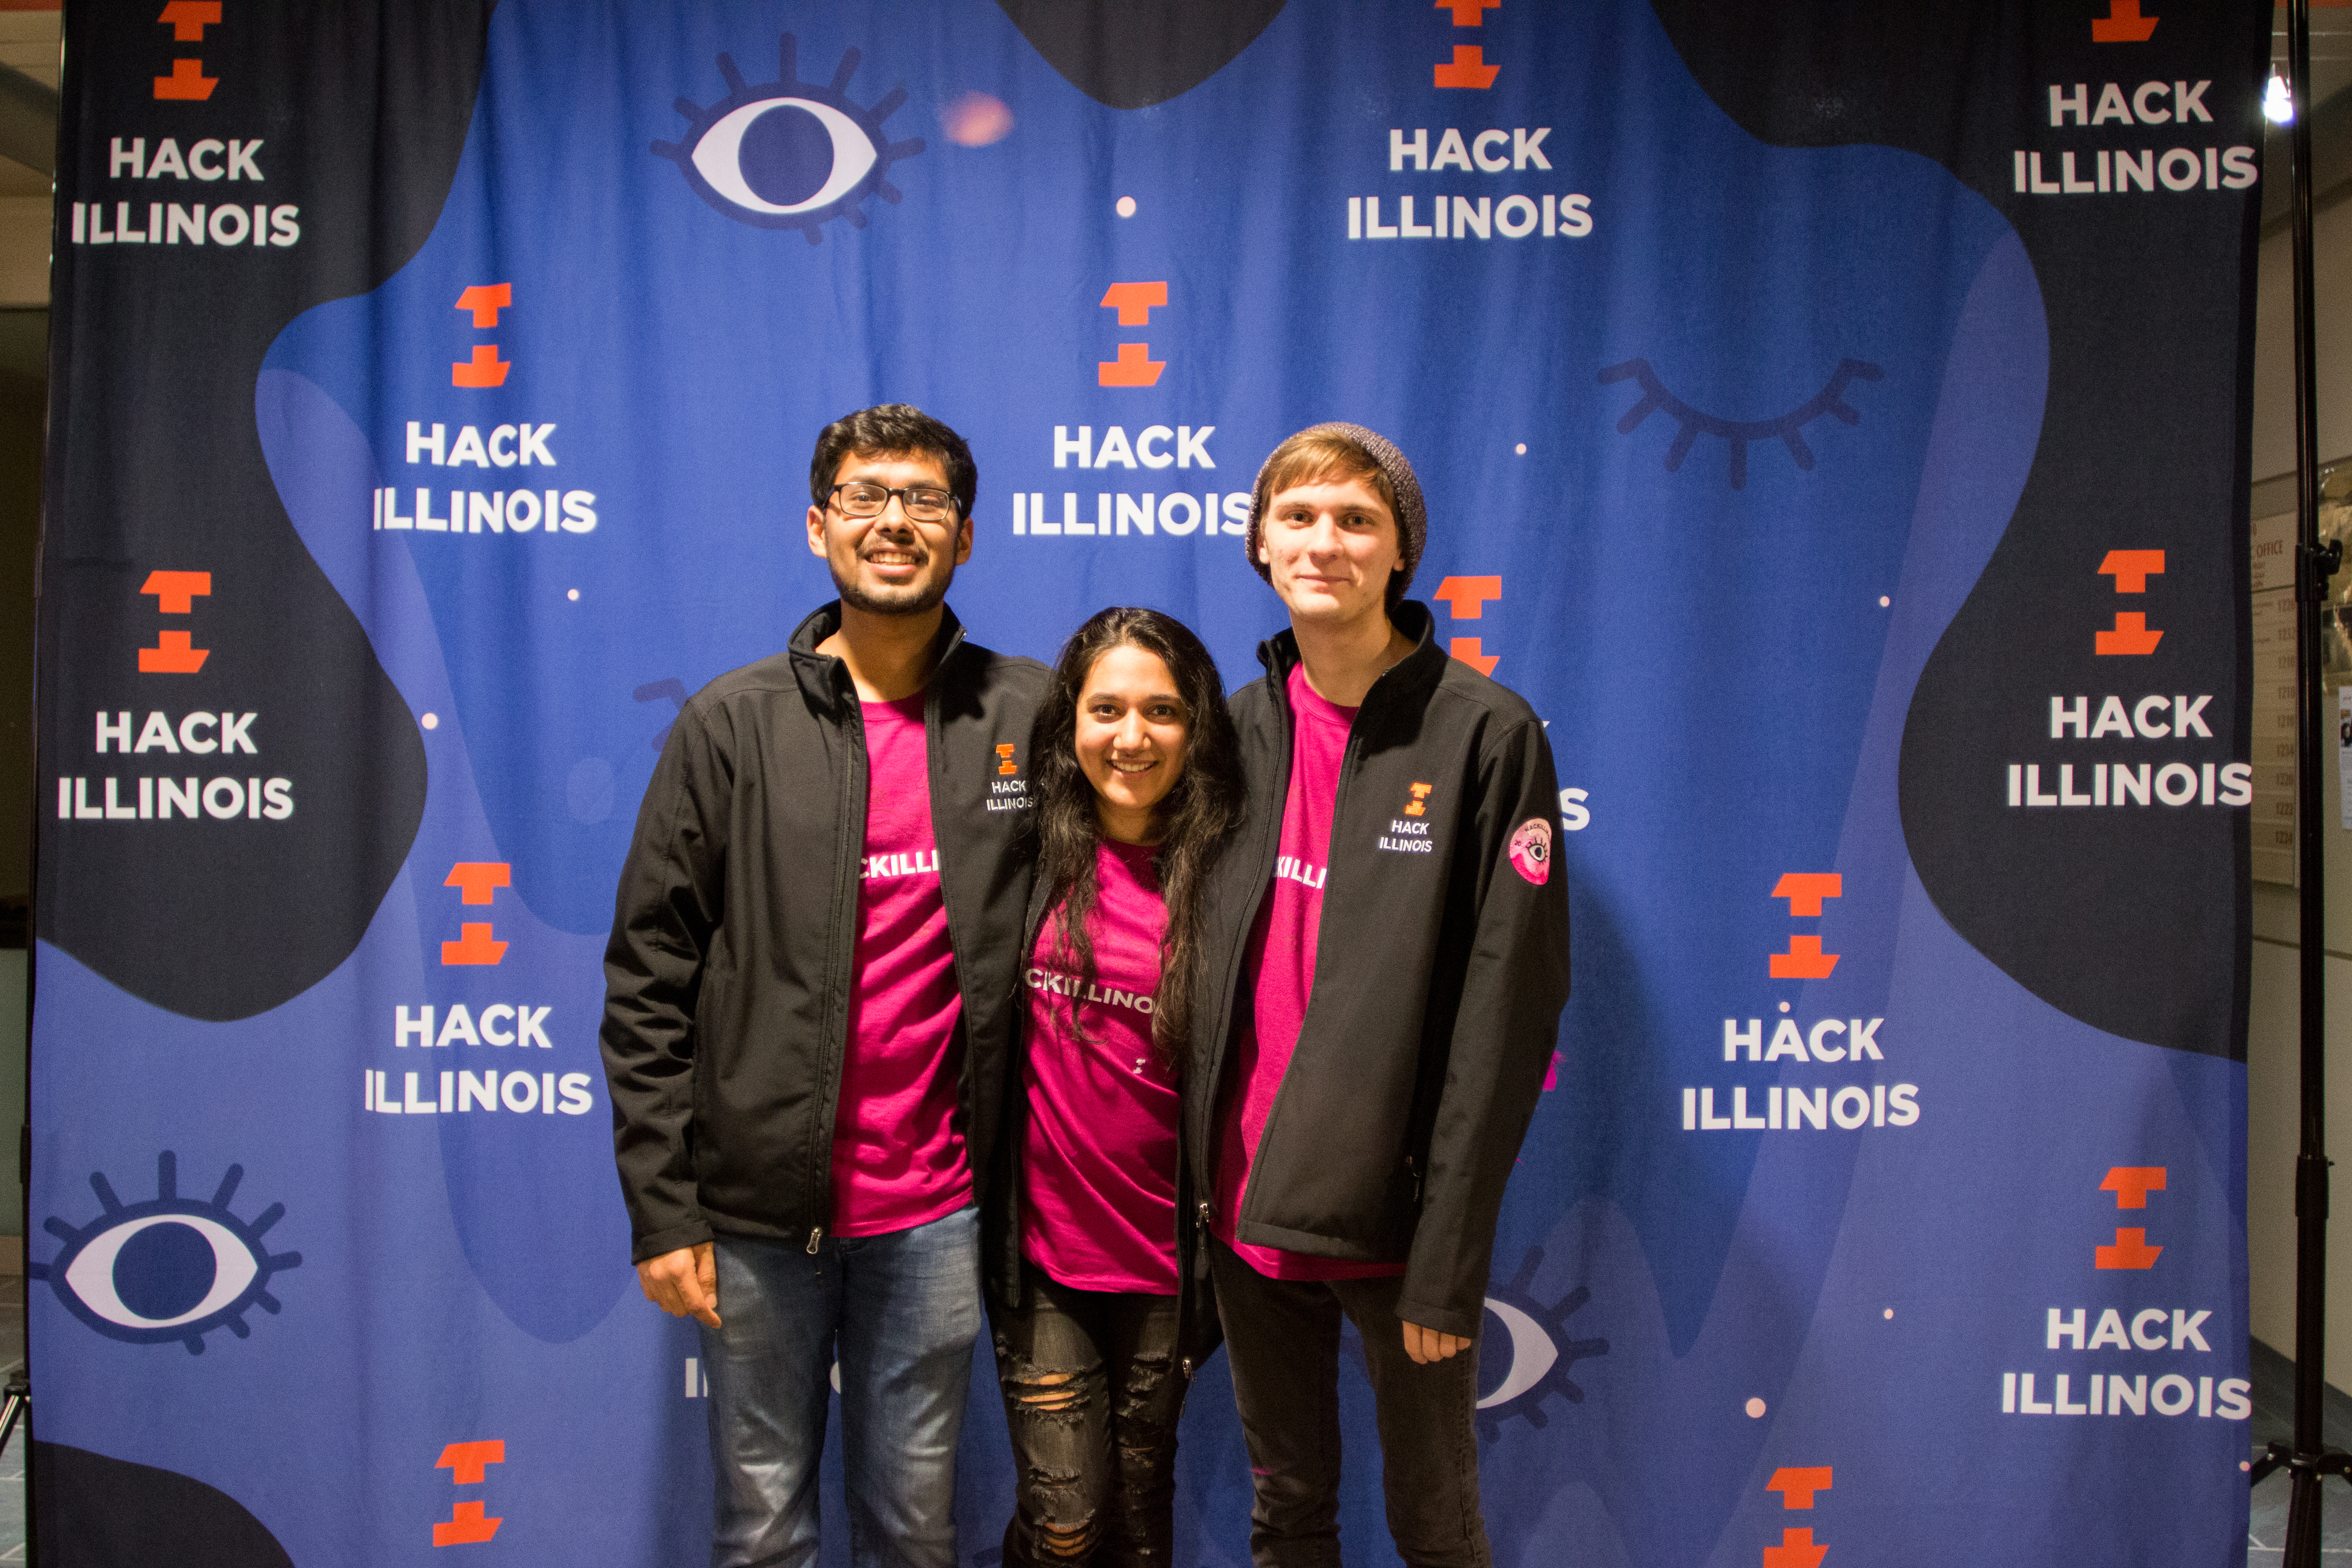 A group of HackIllinois 2018 staff members take a picture in front of the photobooth in their staff t-shirts and jackets.